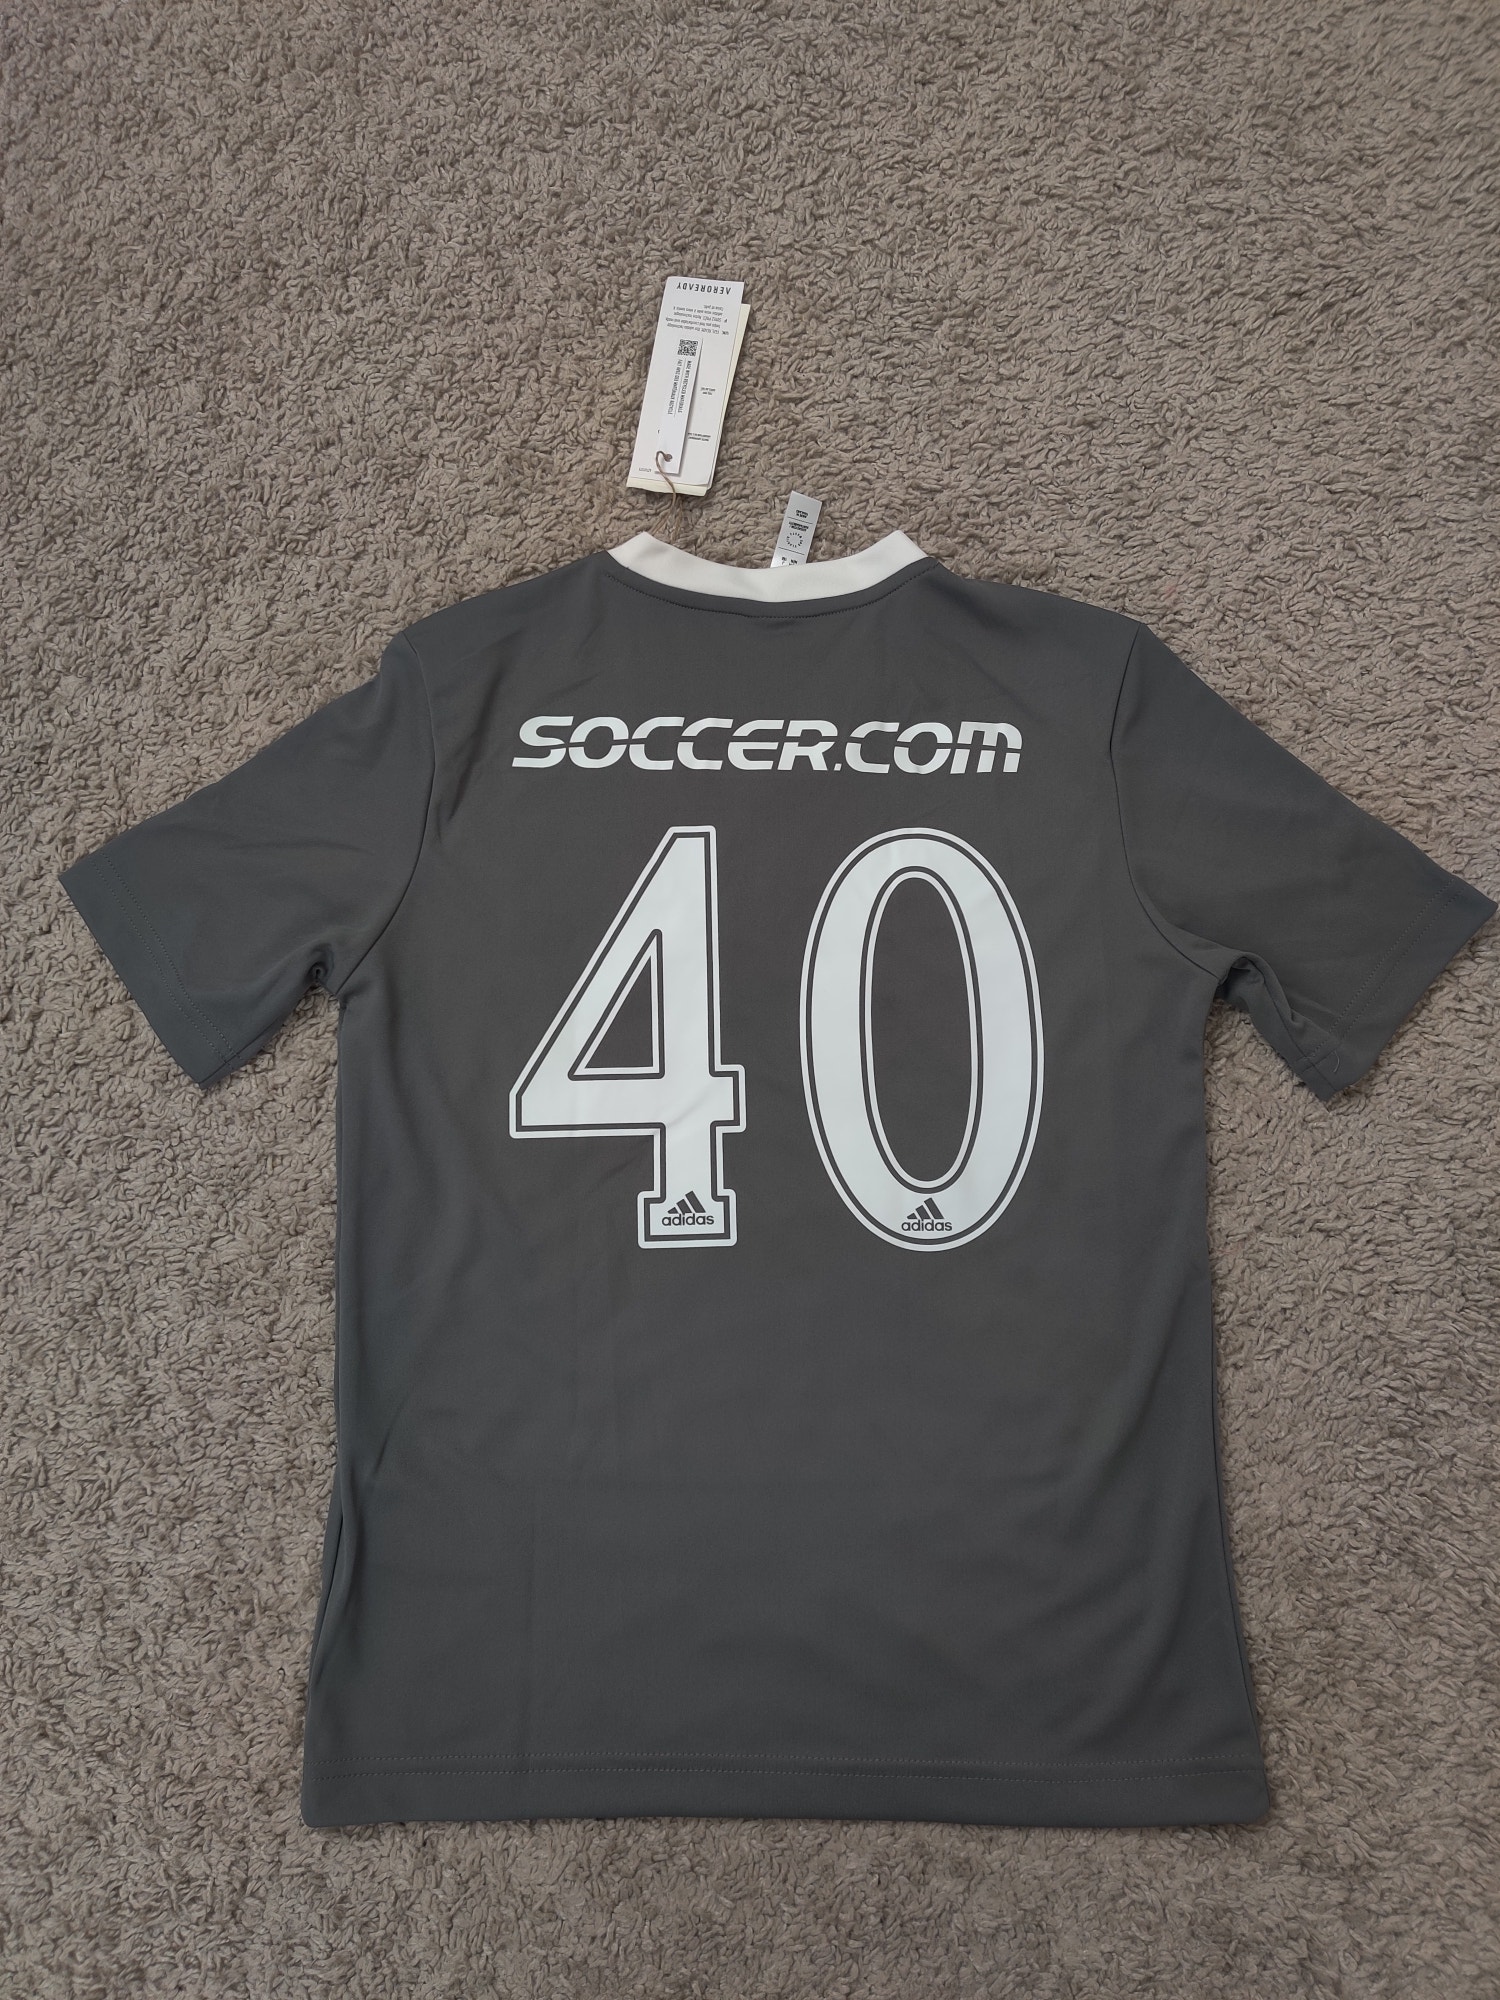 (V) NEW Adidas Youth Falcons Four Cornes FC #40 shirt soccer jersey sz M - Picture 7 of 9